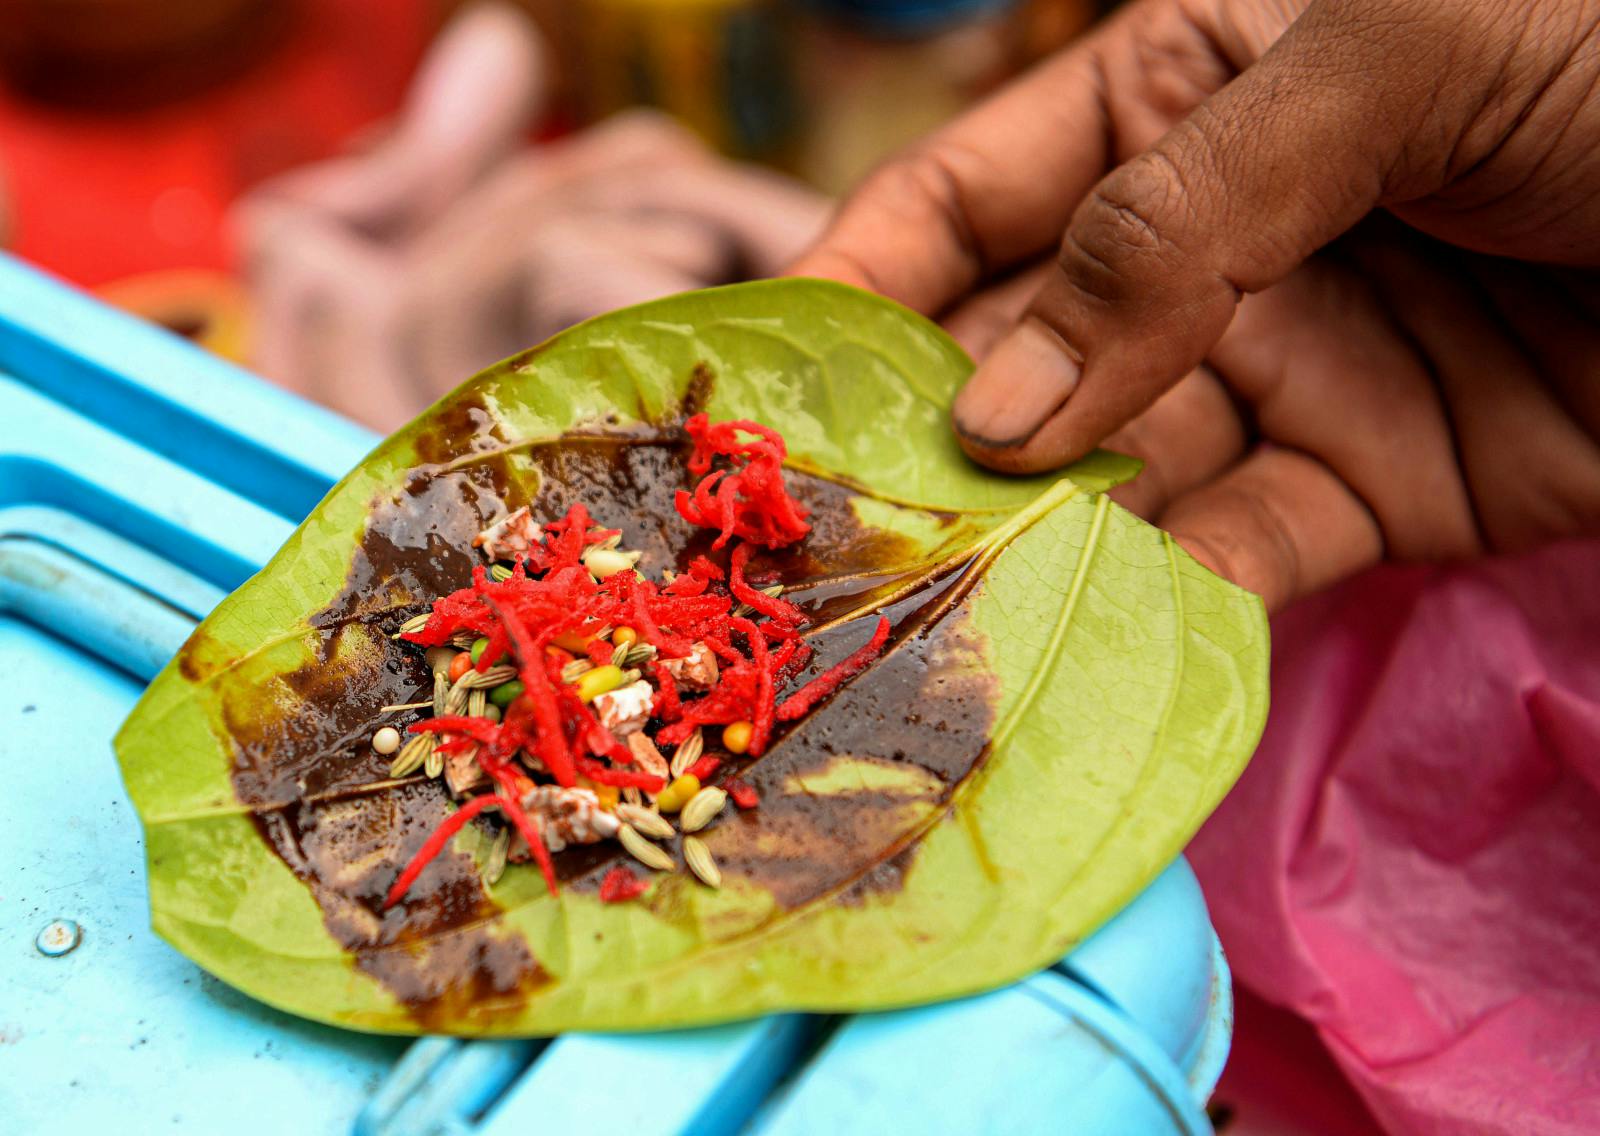 Meetha paan, made of betel leaves filled with tutti-frutti, cherries, dates, betel (areca) nut, slaked lime (chuna; calcium hydroxide) in Little India, Phahurat Market, Bangkok, Thailand (Paul Lakatos/SOPA Images/LightRocket via Getty Images)